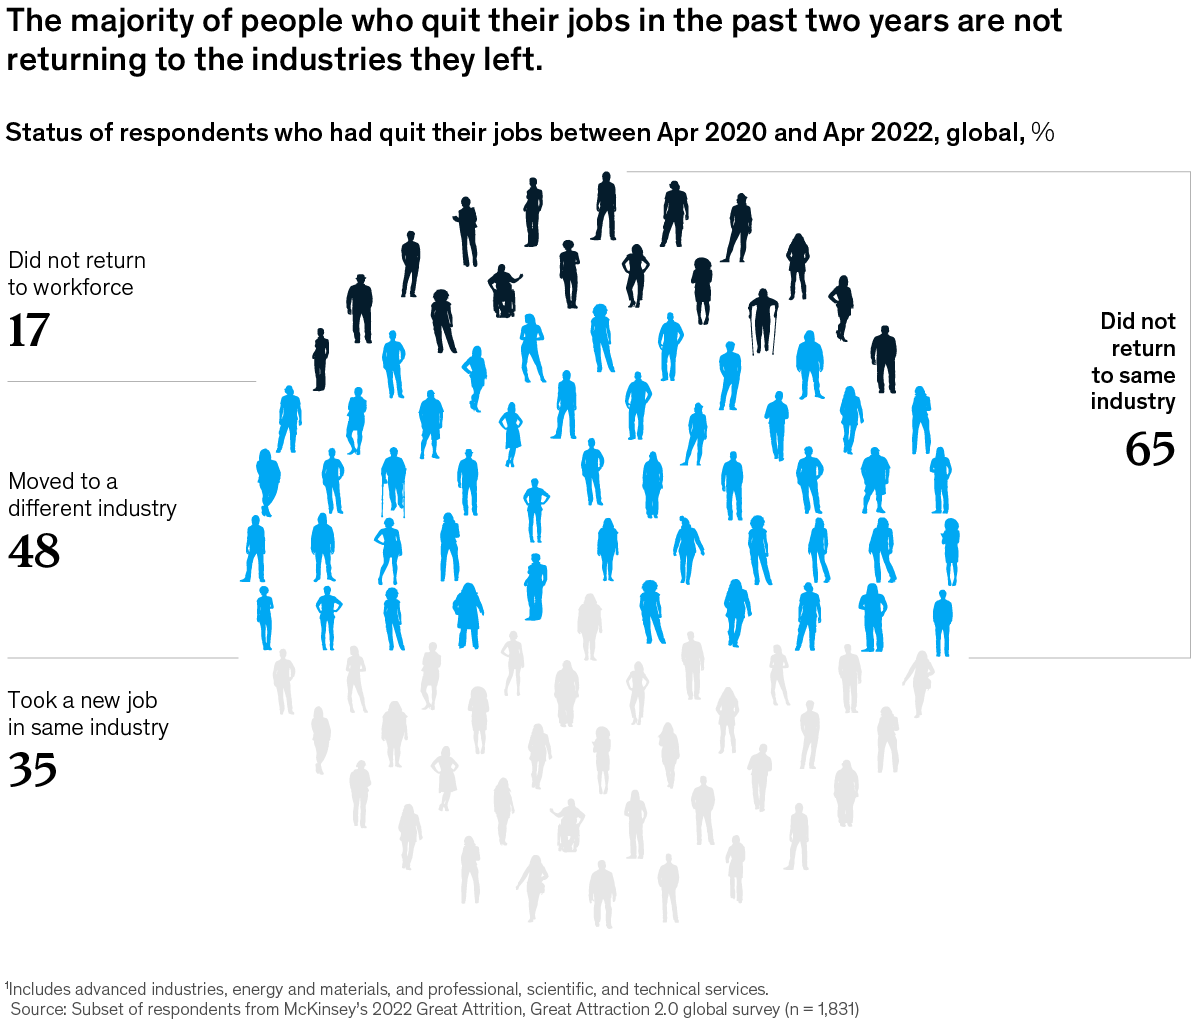 Chart detailing that the majority of people who quit their jobs in the past two years are not returning to the industries they left